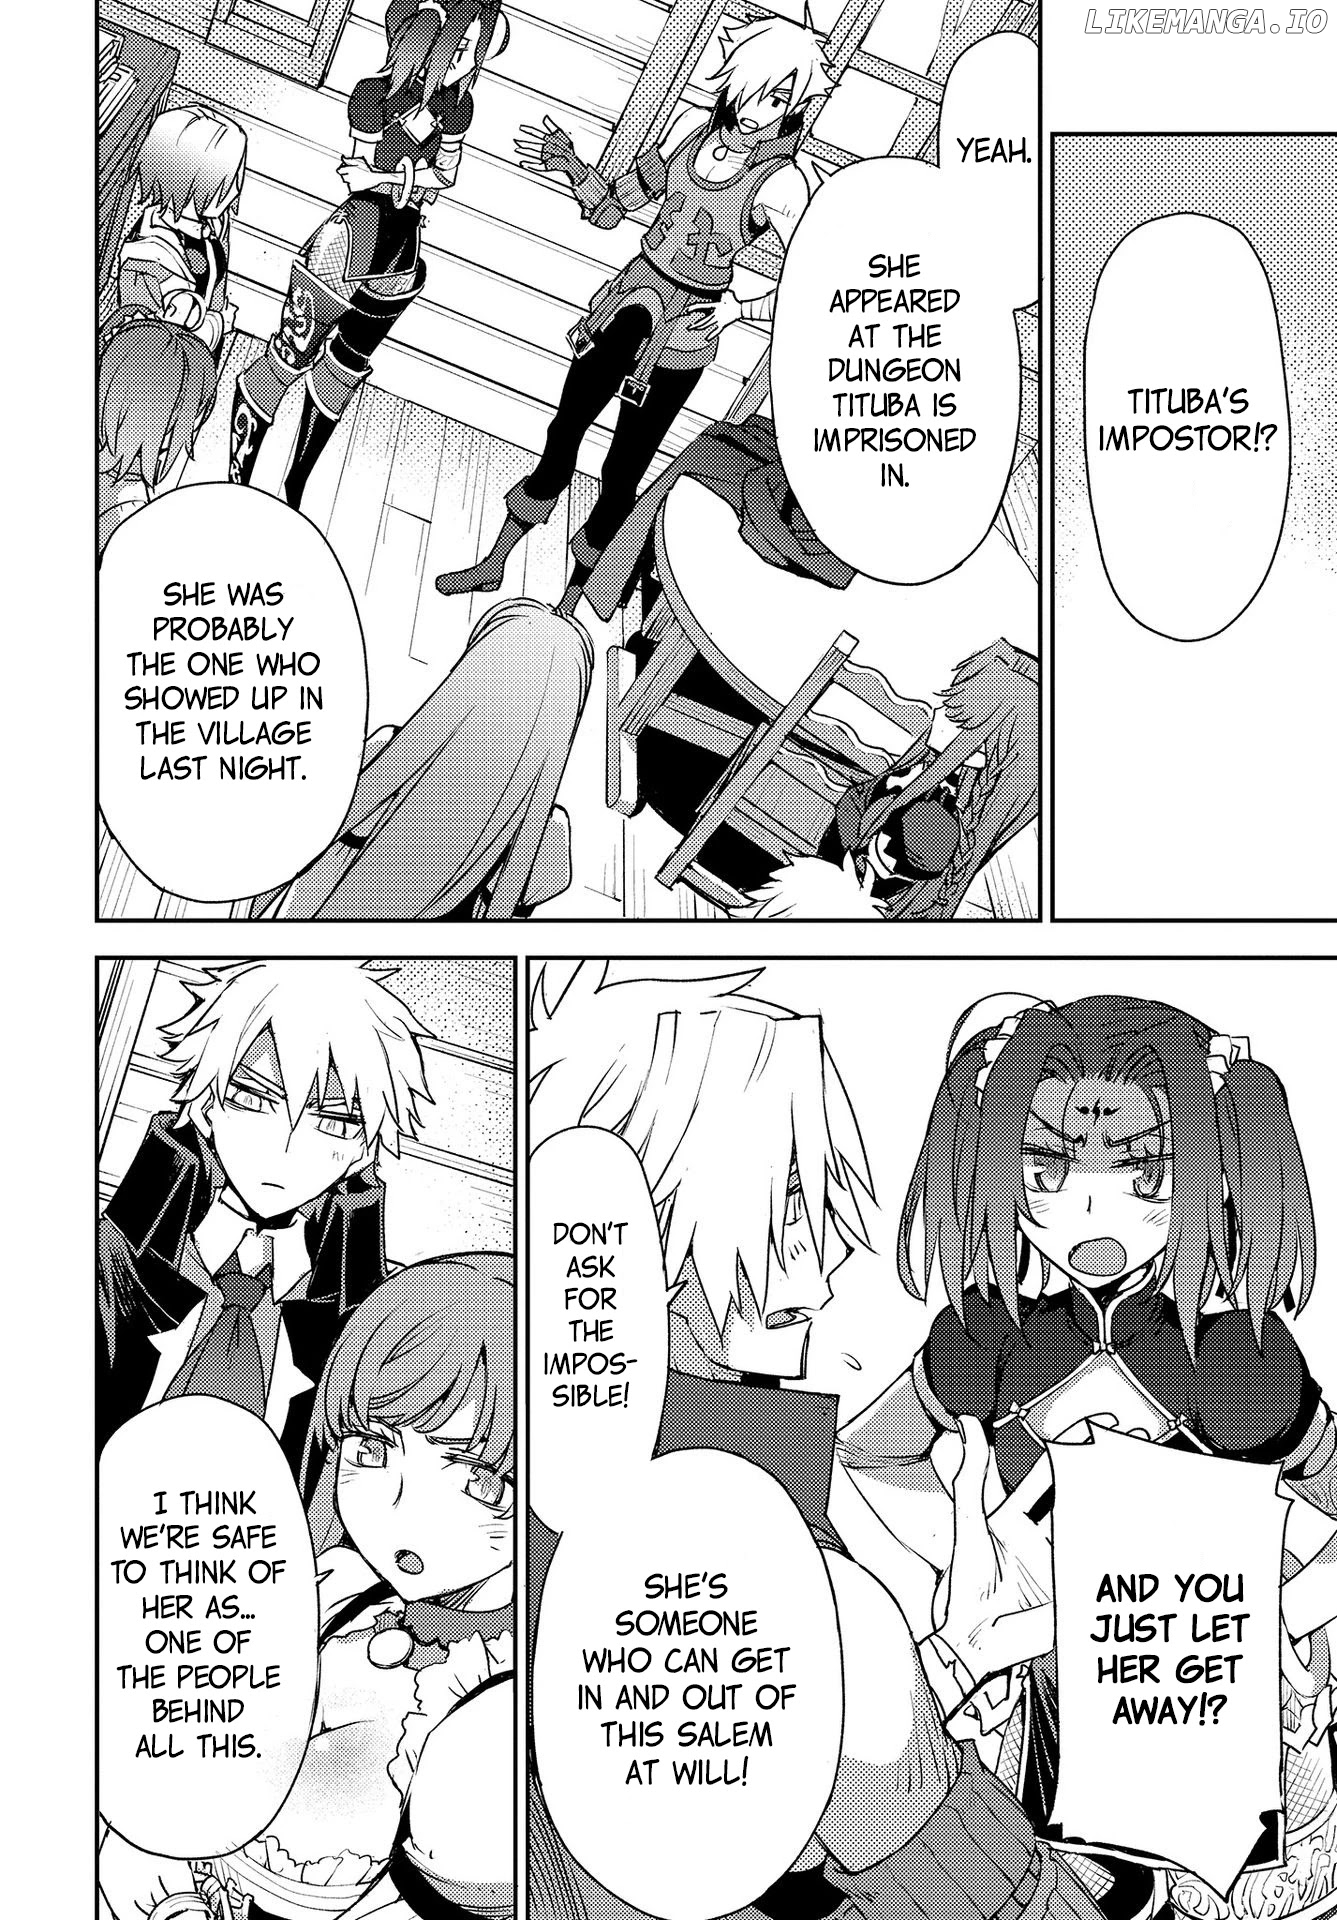 Fate/Grand Order: Epic of Remnant - Subspecies Singularity IV: Taboo Advent Salem: Salem of Heresy chapter 10 - page 20